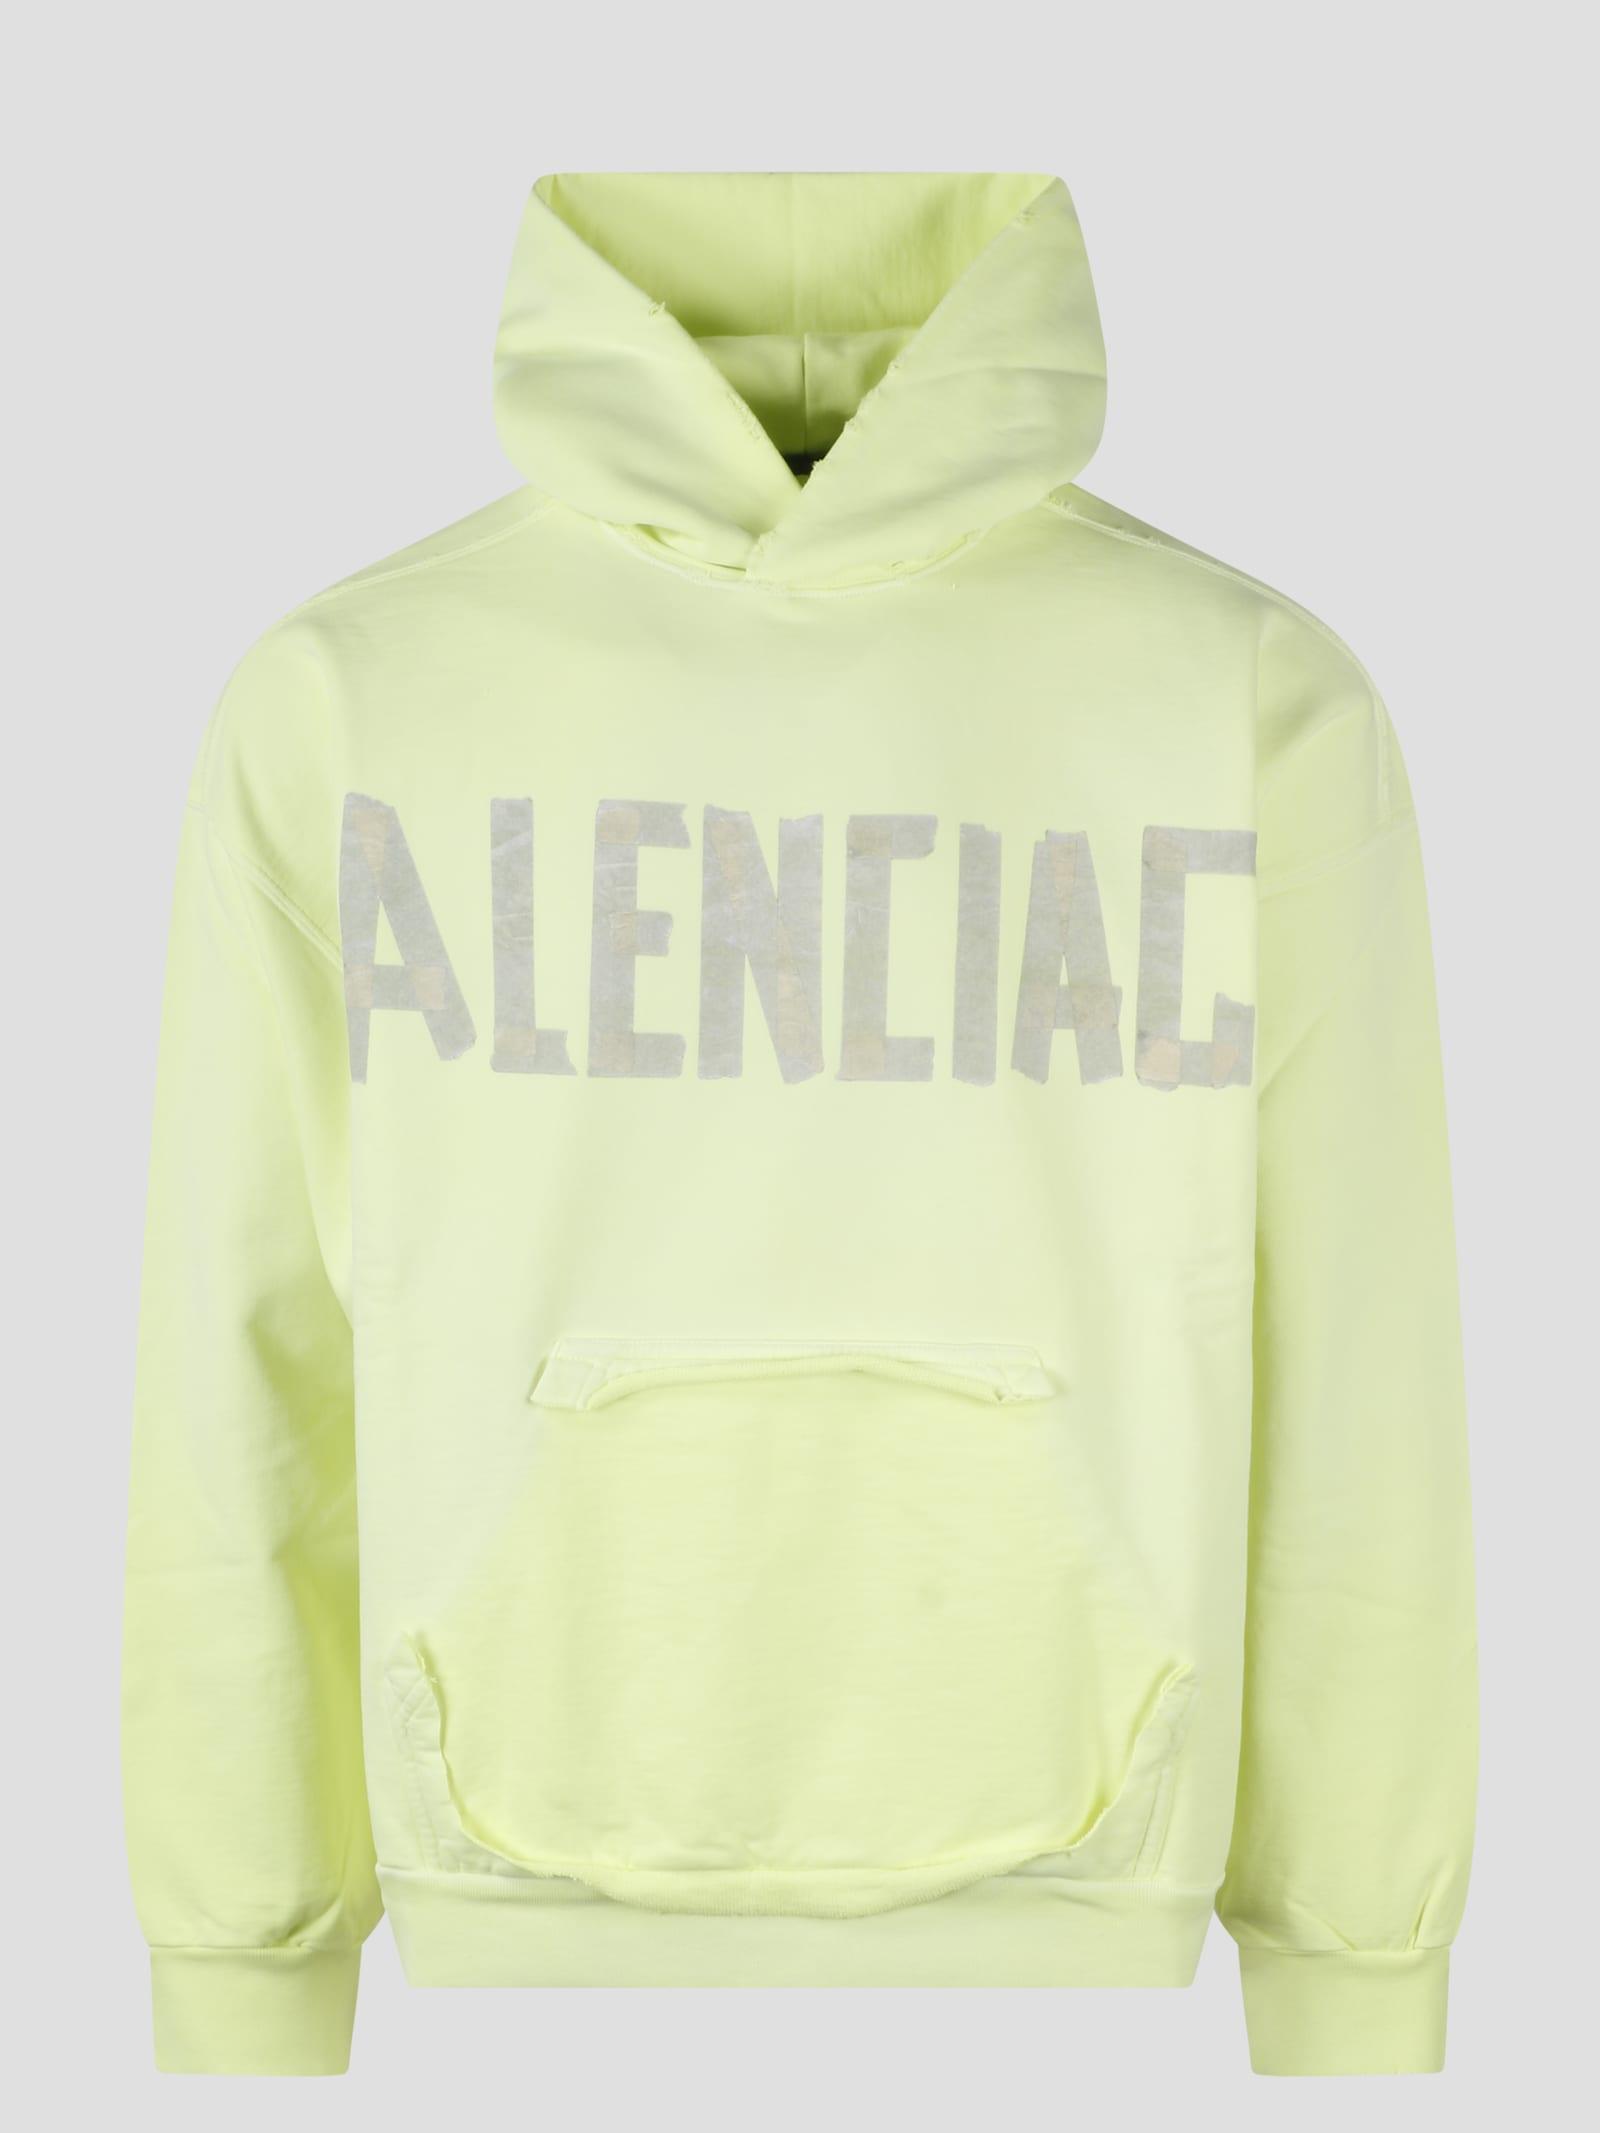 Balenciaga Tape Type Ripped Pocket Hoodie in Yellow for Men | Lyst